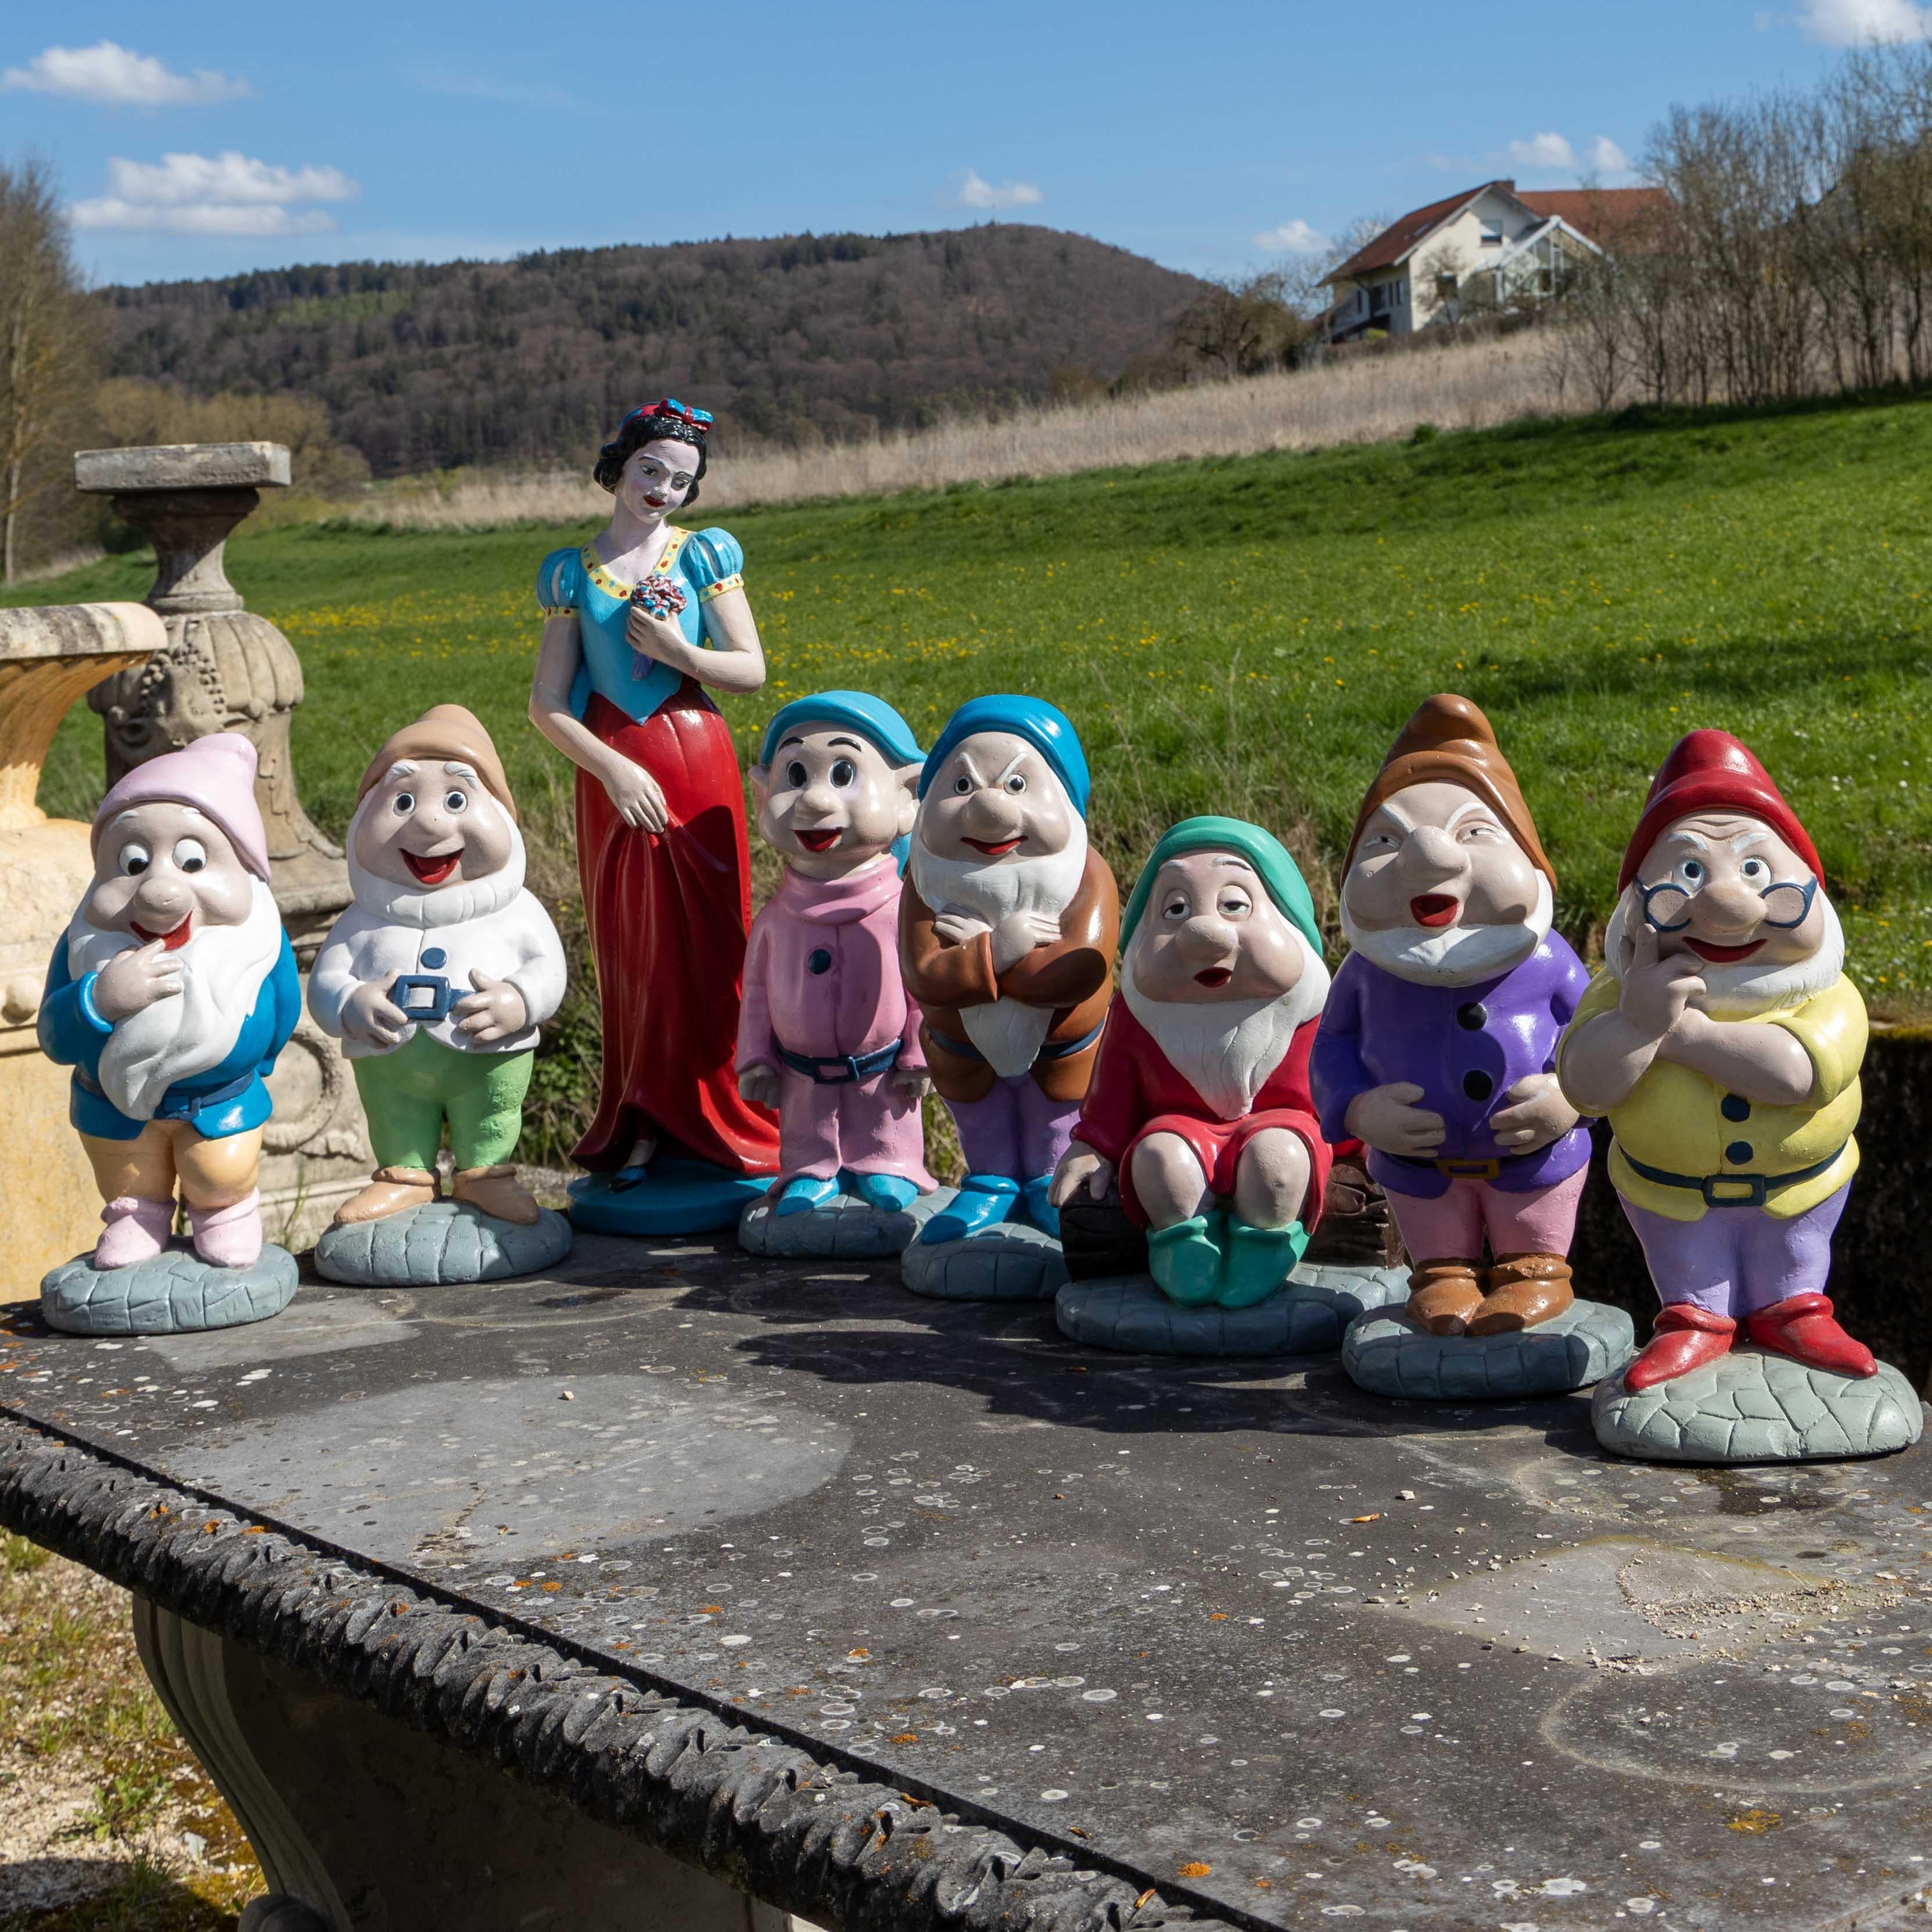 The detailed figures are perfect for decorating gardens and other outdoor areas.